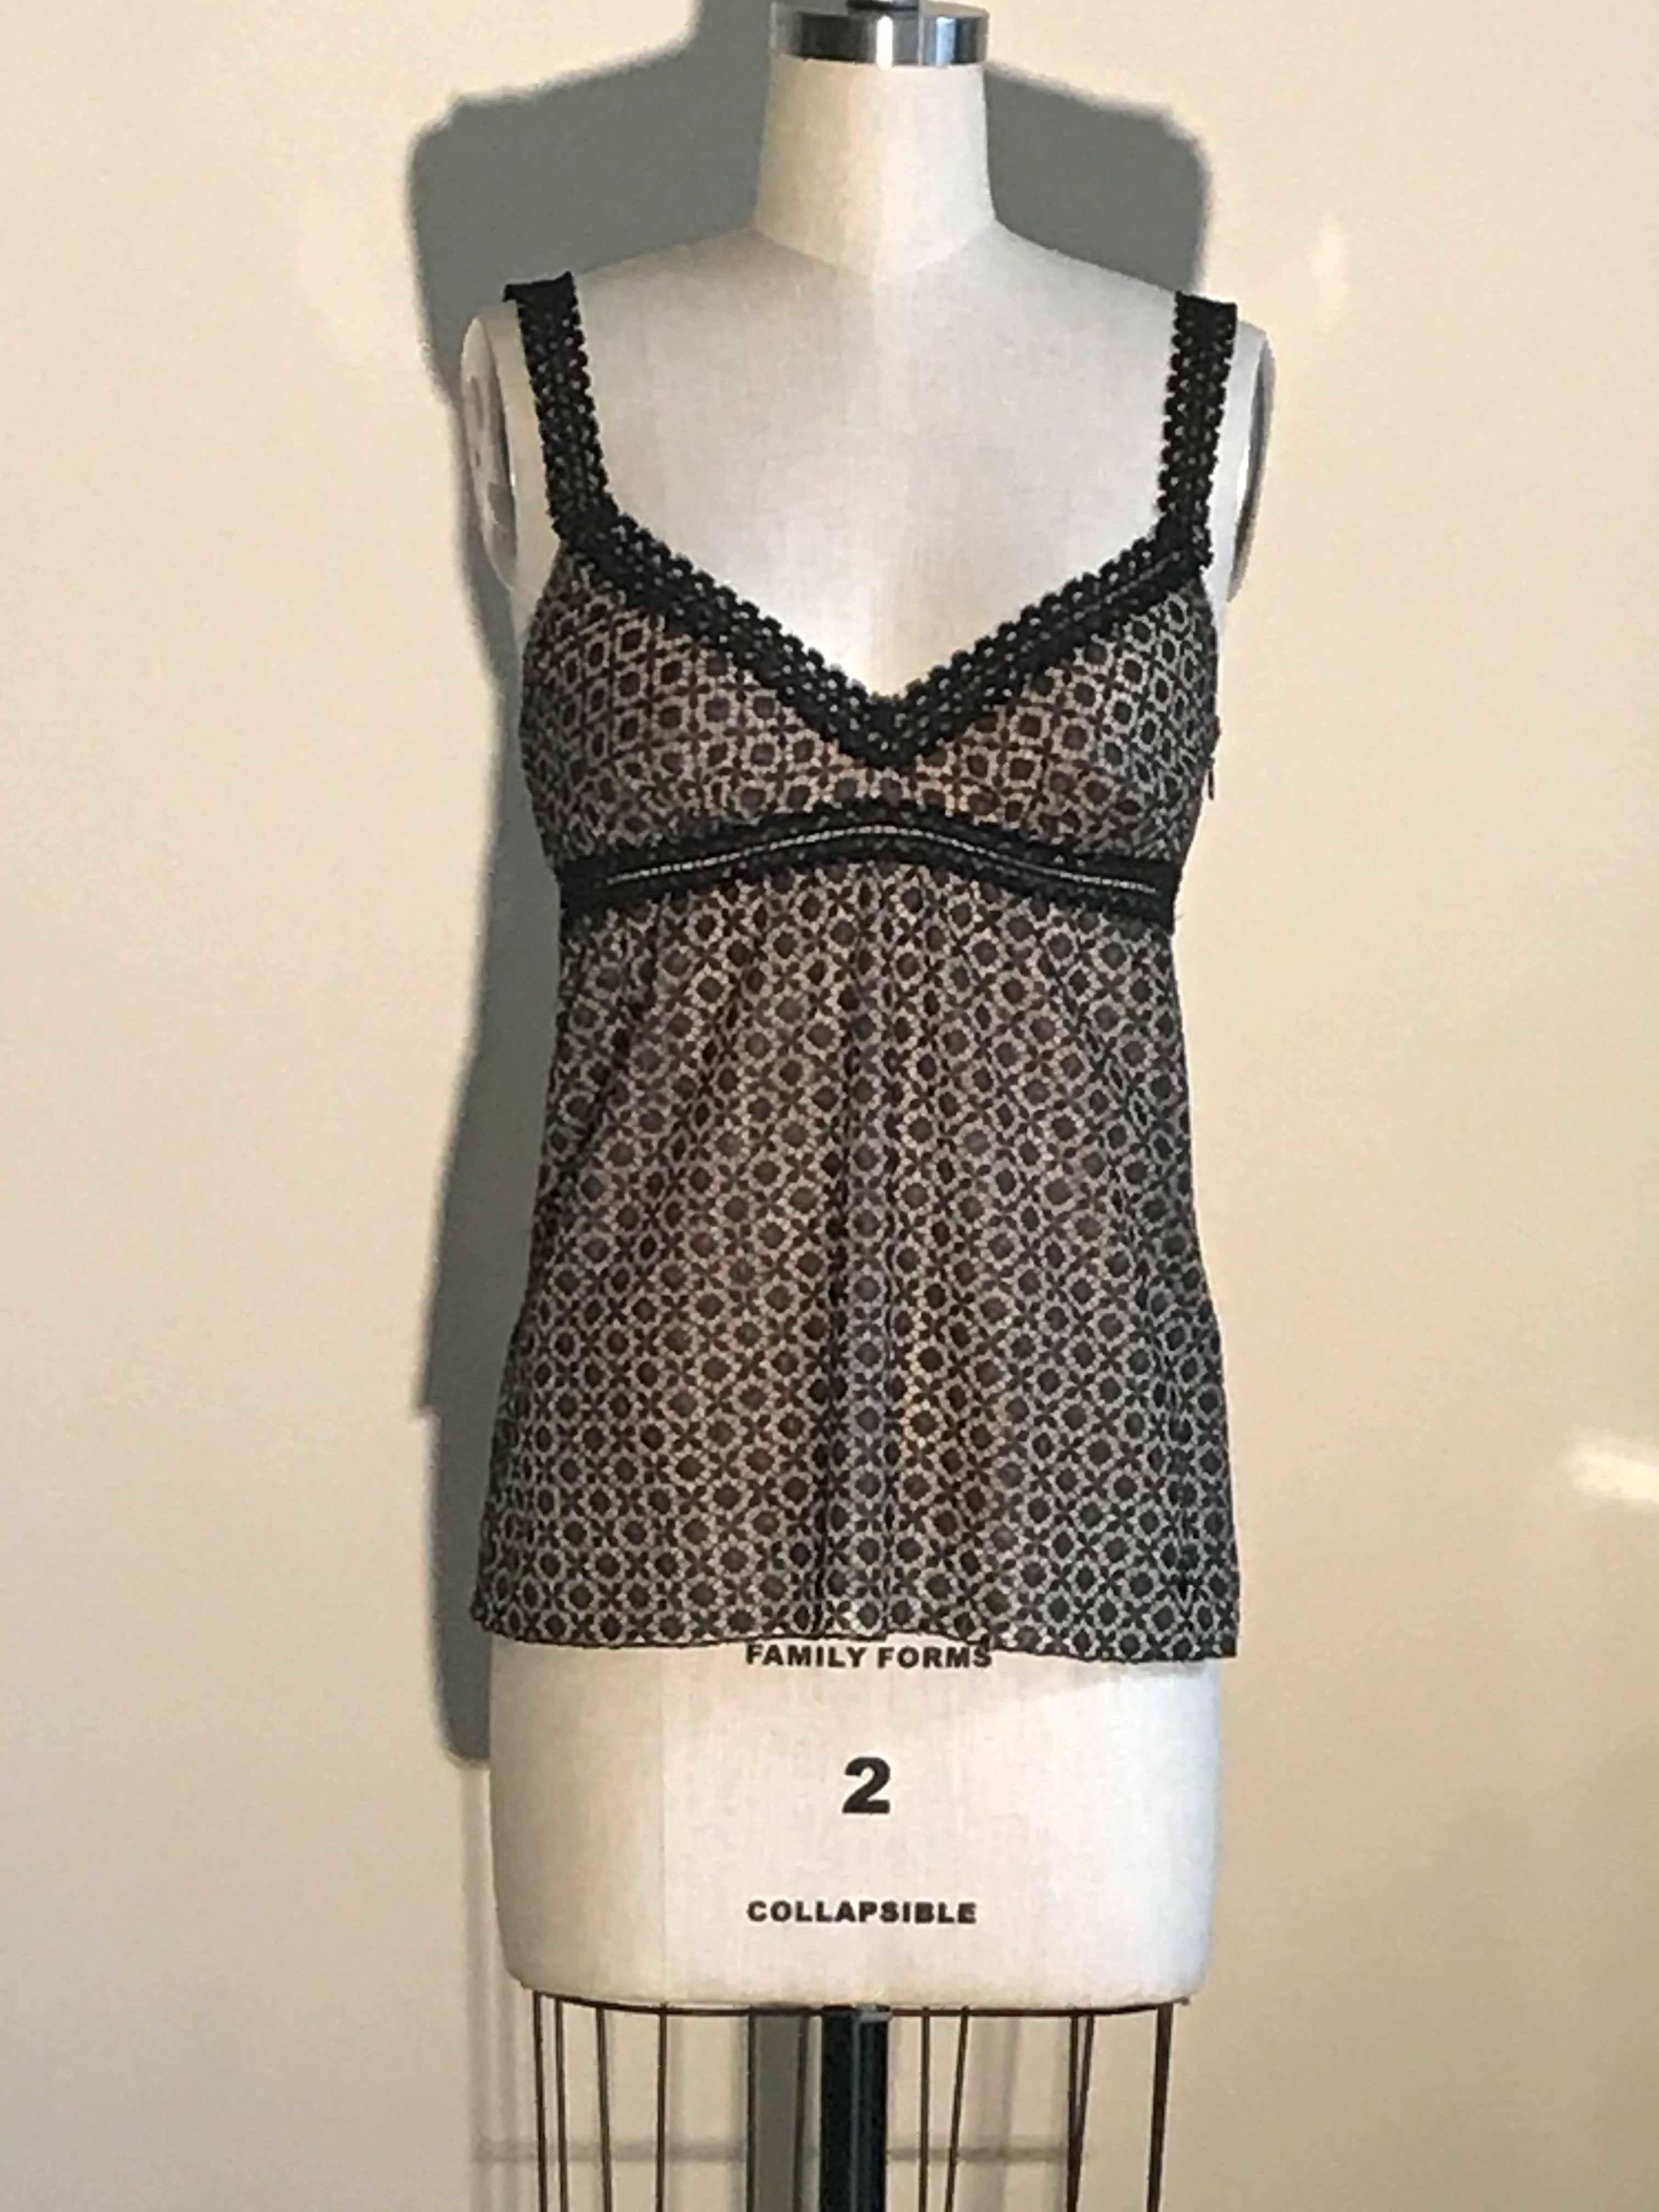 Chanel black geometric lace sleeveless top with nude colored slip style tank lining. Small black CC logo embellishment at side hip. Stretchy under layer, side zip at top layer. 

Outer layer 100% polyester. 
Lining is 84% silk, 16% spandex. 

Made